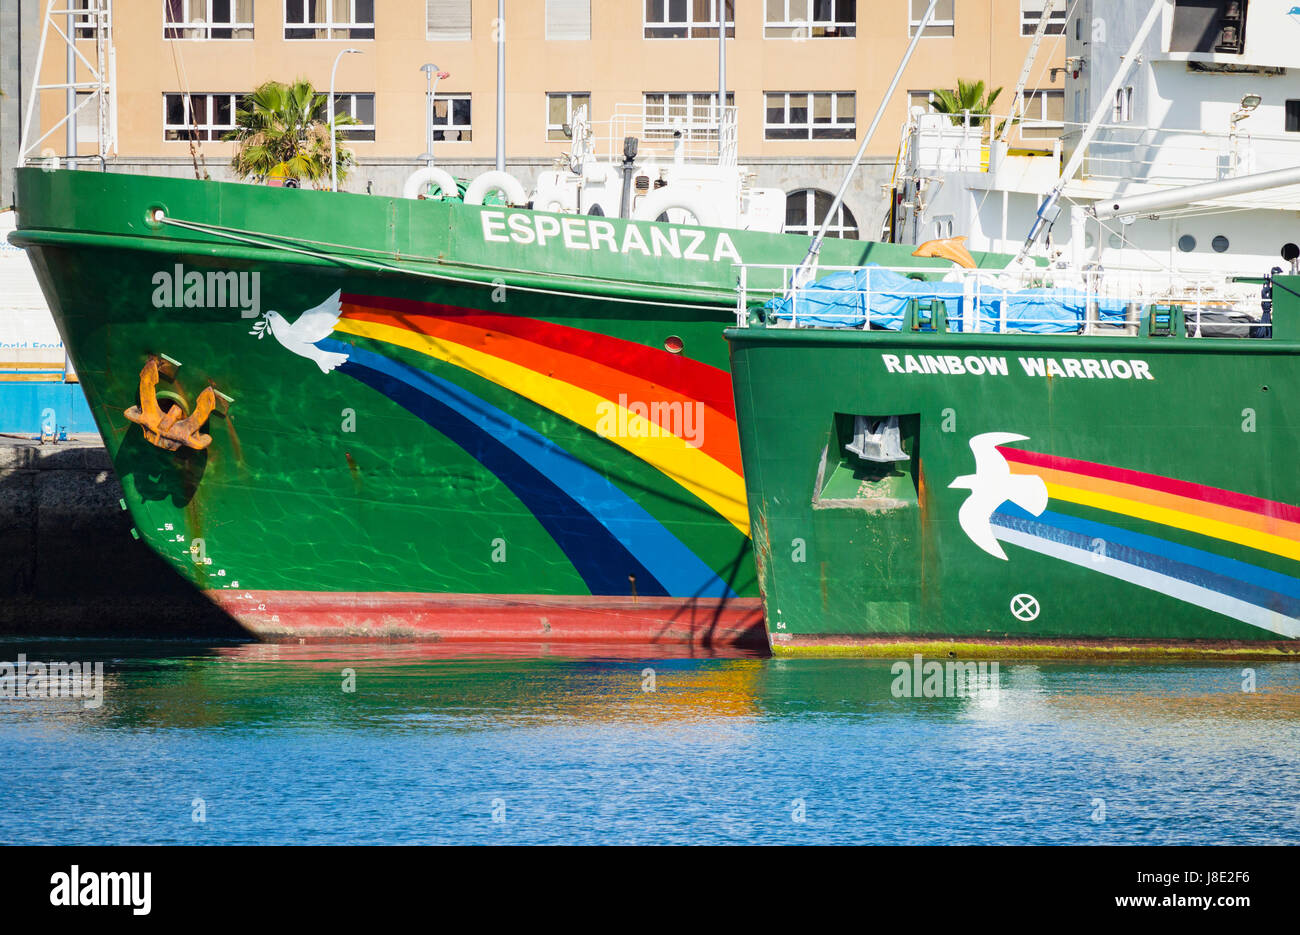 Greenpeace ships Rainbow Warrior and Esperanza in Las Palmas port. Esperanza stops for maintenance work following two monhs patrolling the West African coast investigating overfishing and illegal fishing of the area by industrial fishing vessels. Rainbow Warrior makes a short stop on its way from Brazil to the Mediterranean for its next campaingn: 'plastic is not fantastic'. Credit: ALAN DAWSON/Alamy Live News Stock Photo